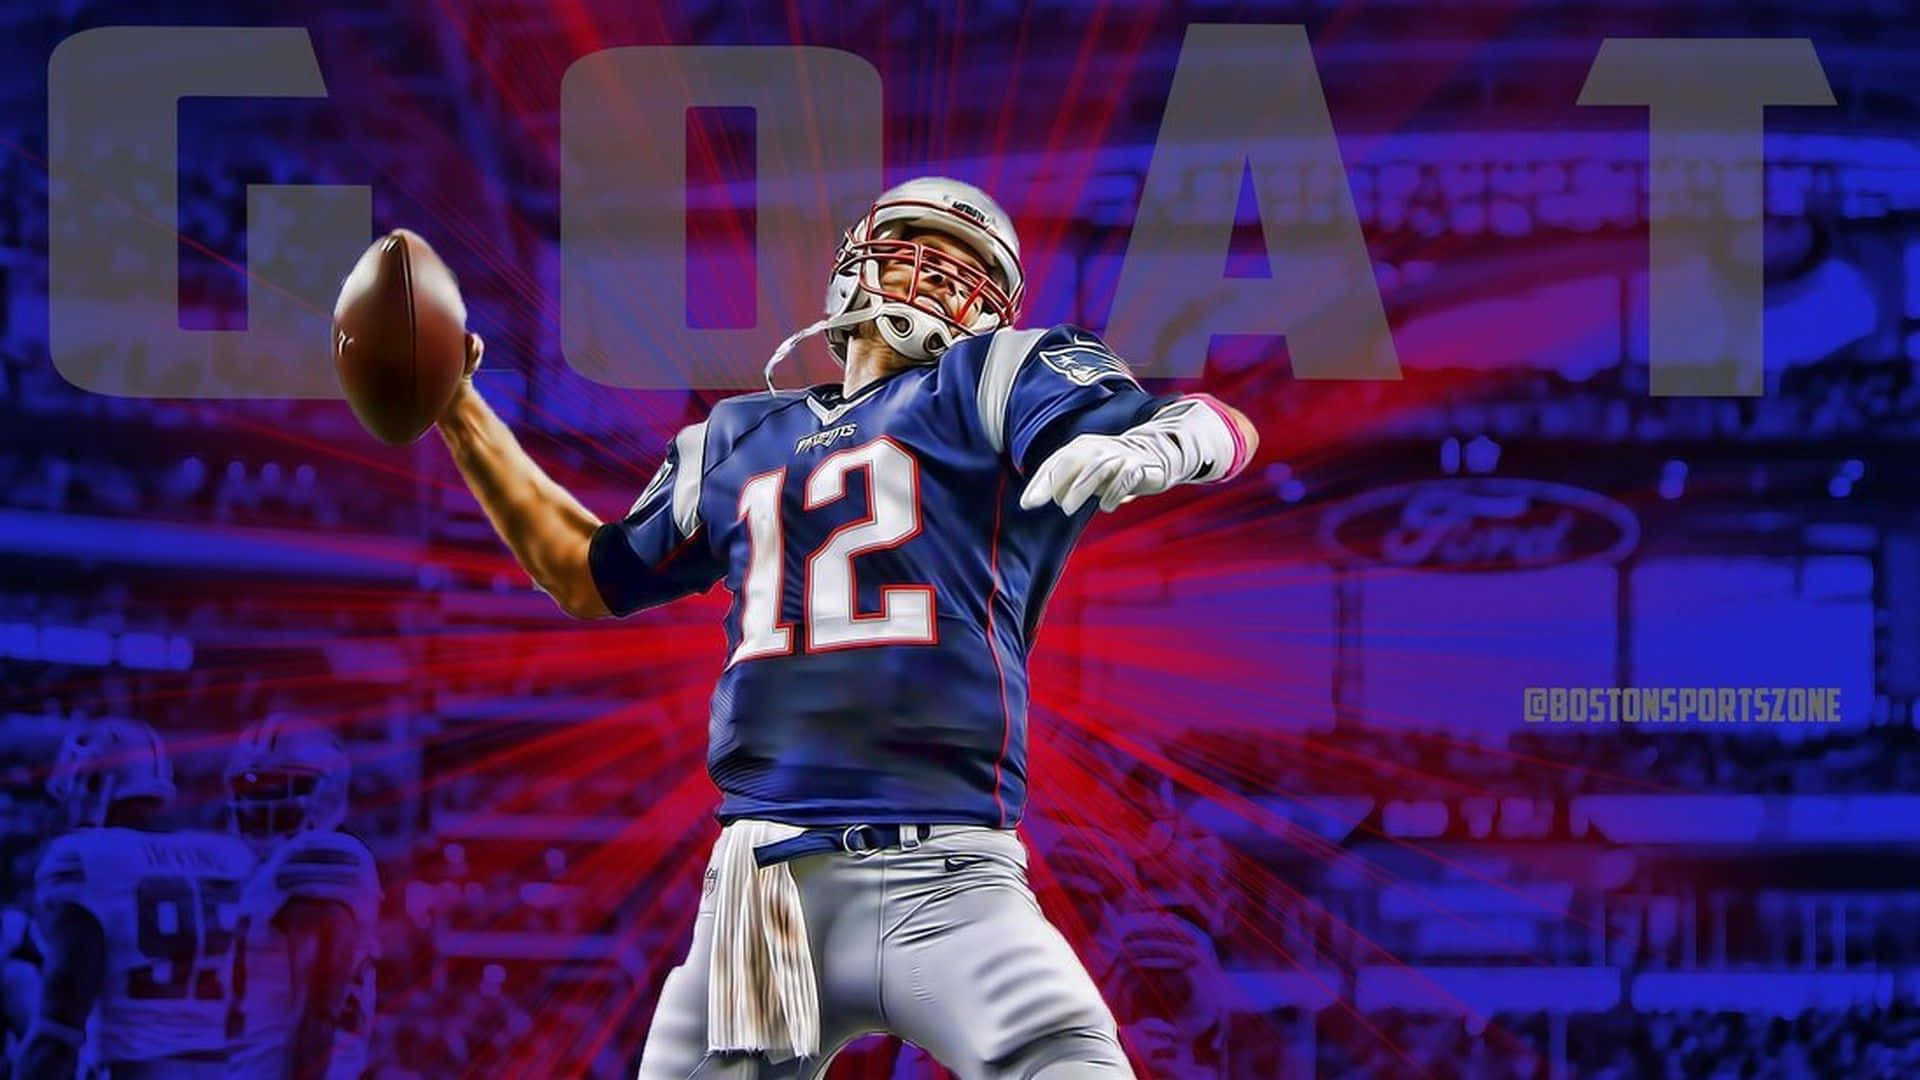 Show Your Patriot Spirit By Customizing Your Desktop Background